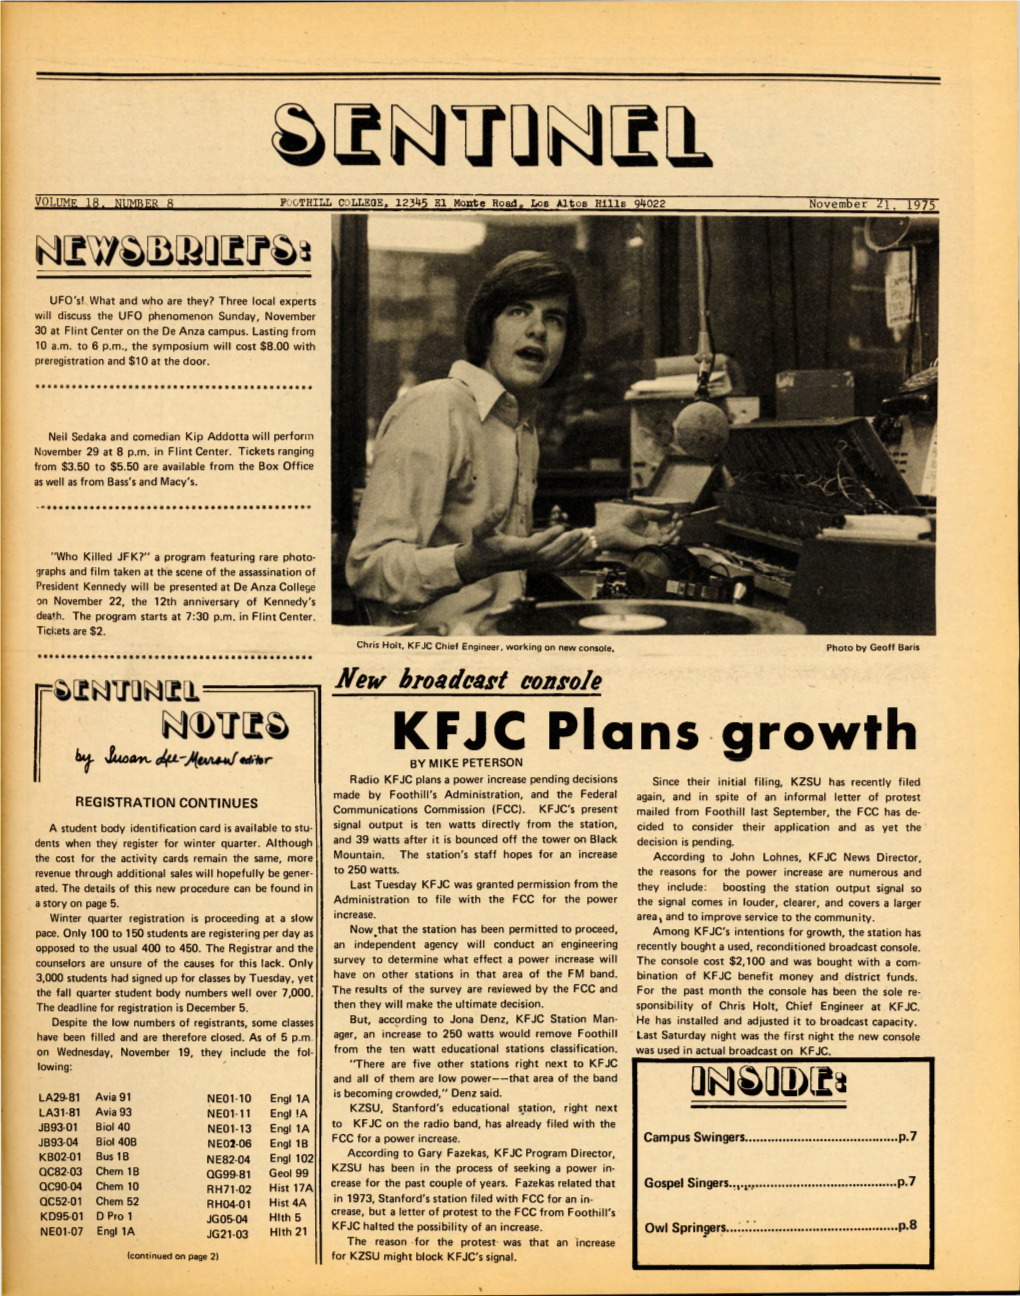 KFJC Plans Growth ^ Juo&N, by MIKE PETERSON